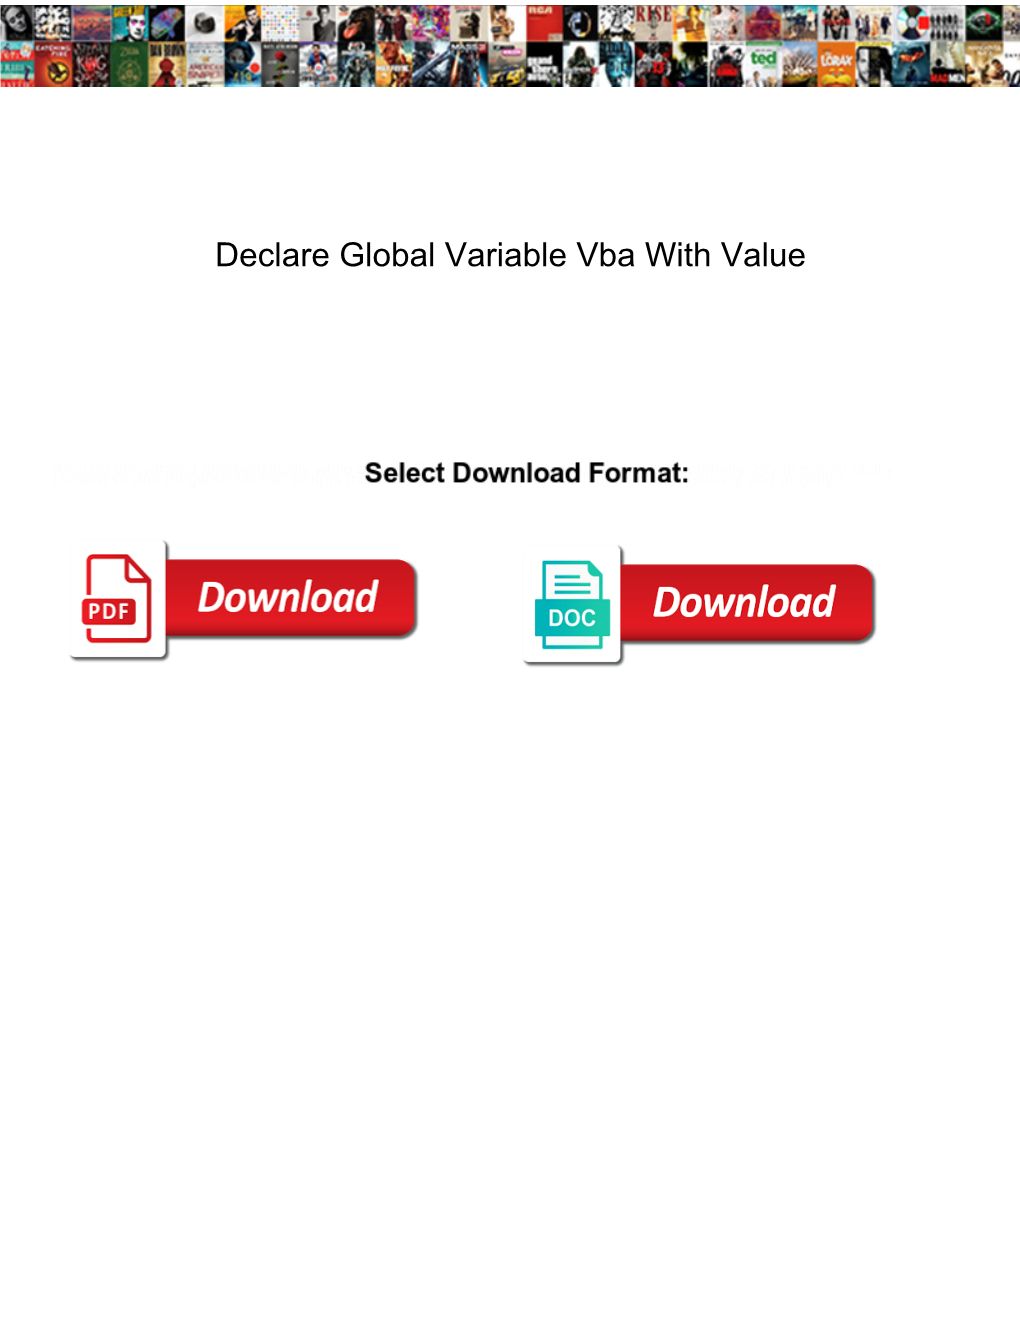 Declare Global Variable Vba with Value